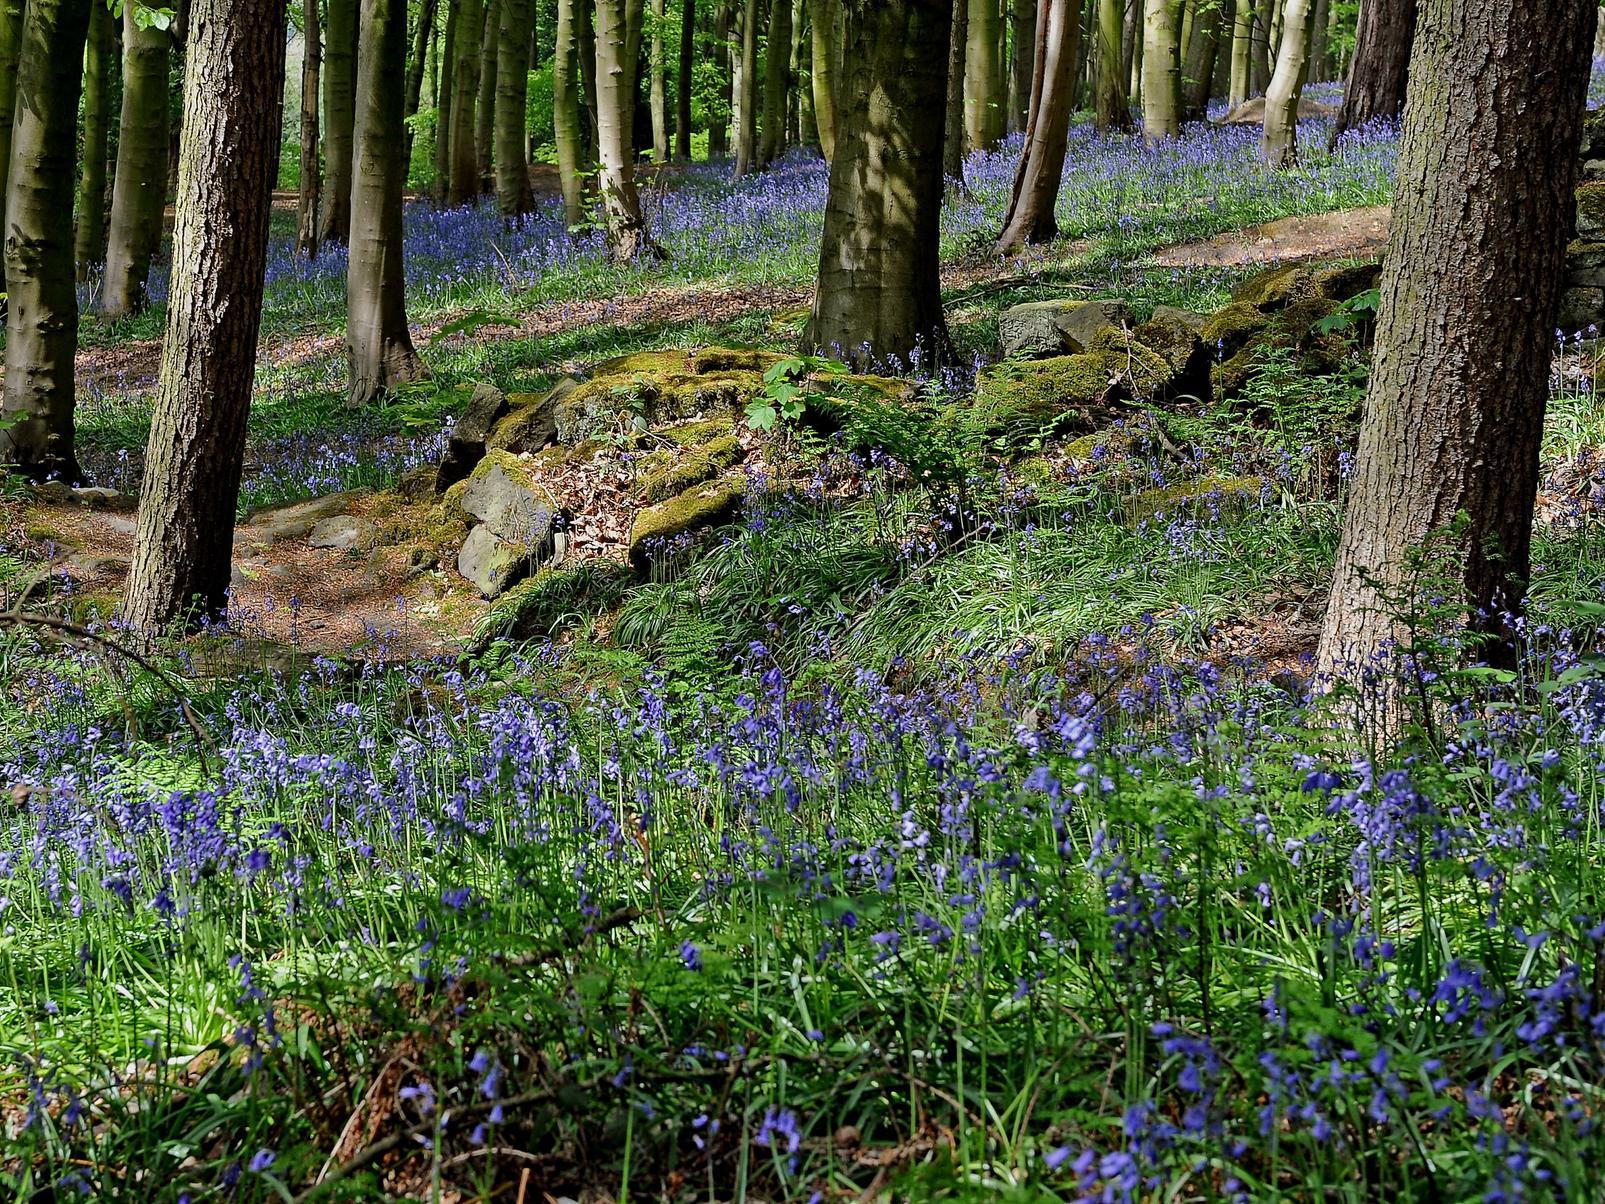 Bluebells in Esholt Woods located between Shipley and Guiseley on the Leeds and  Bradford border.